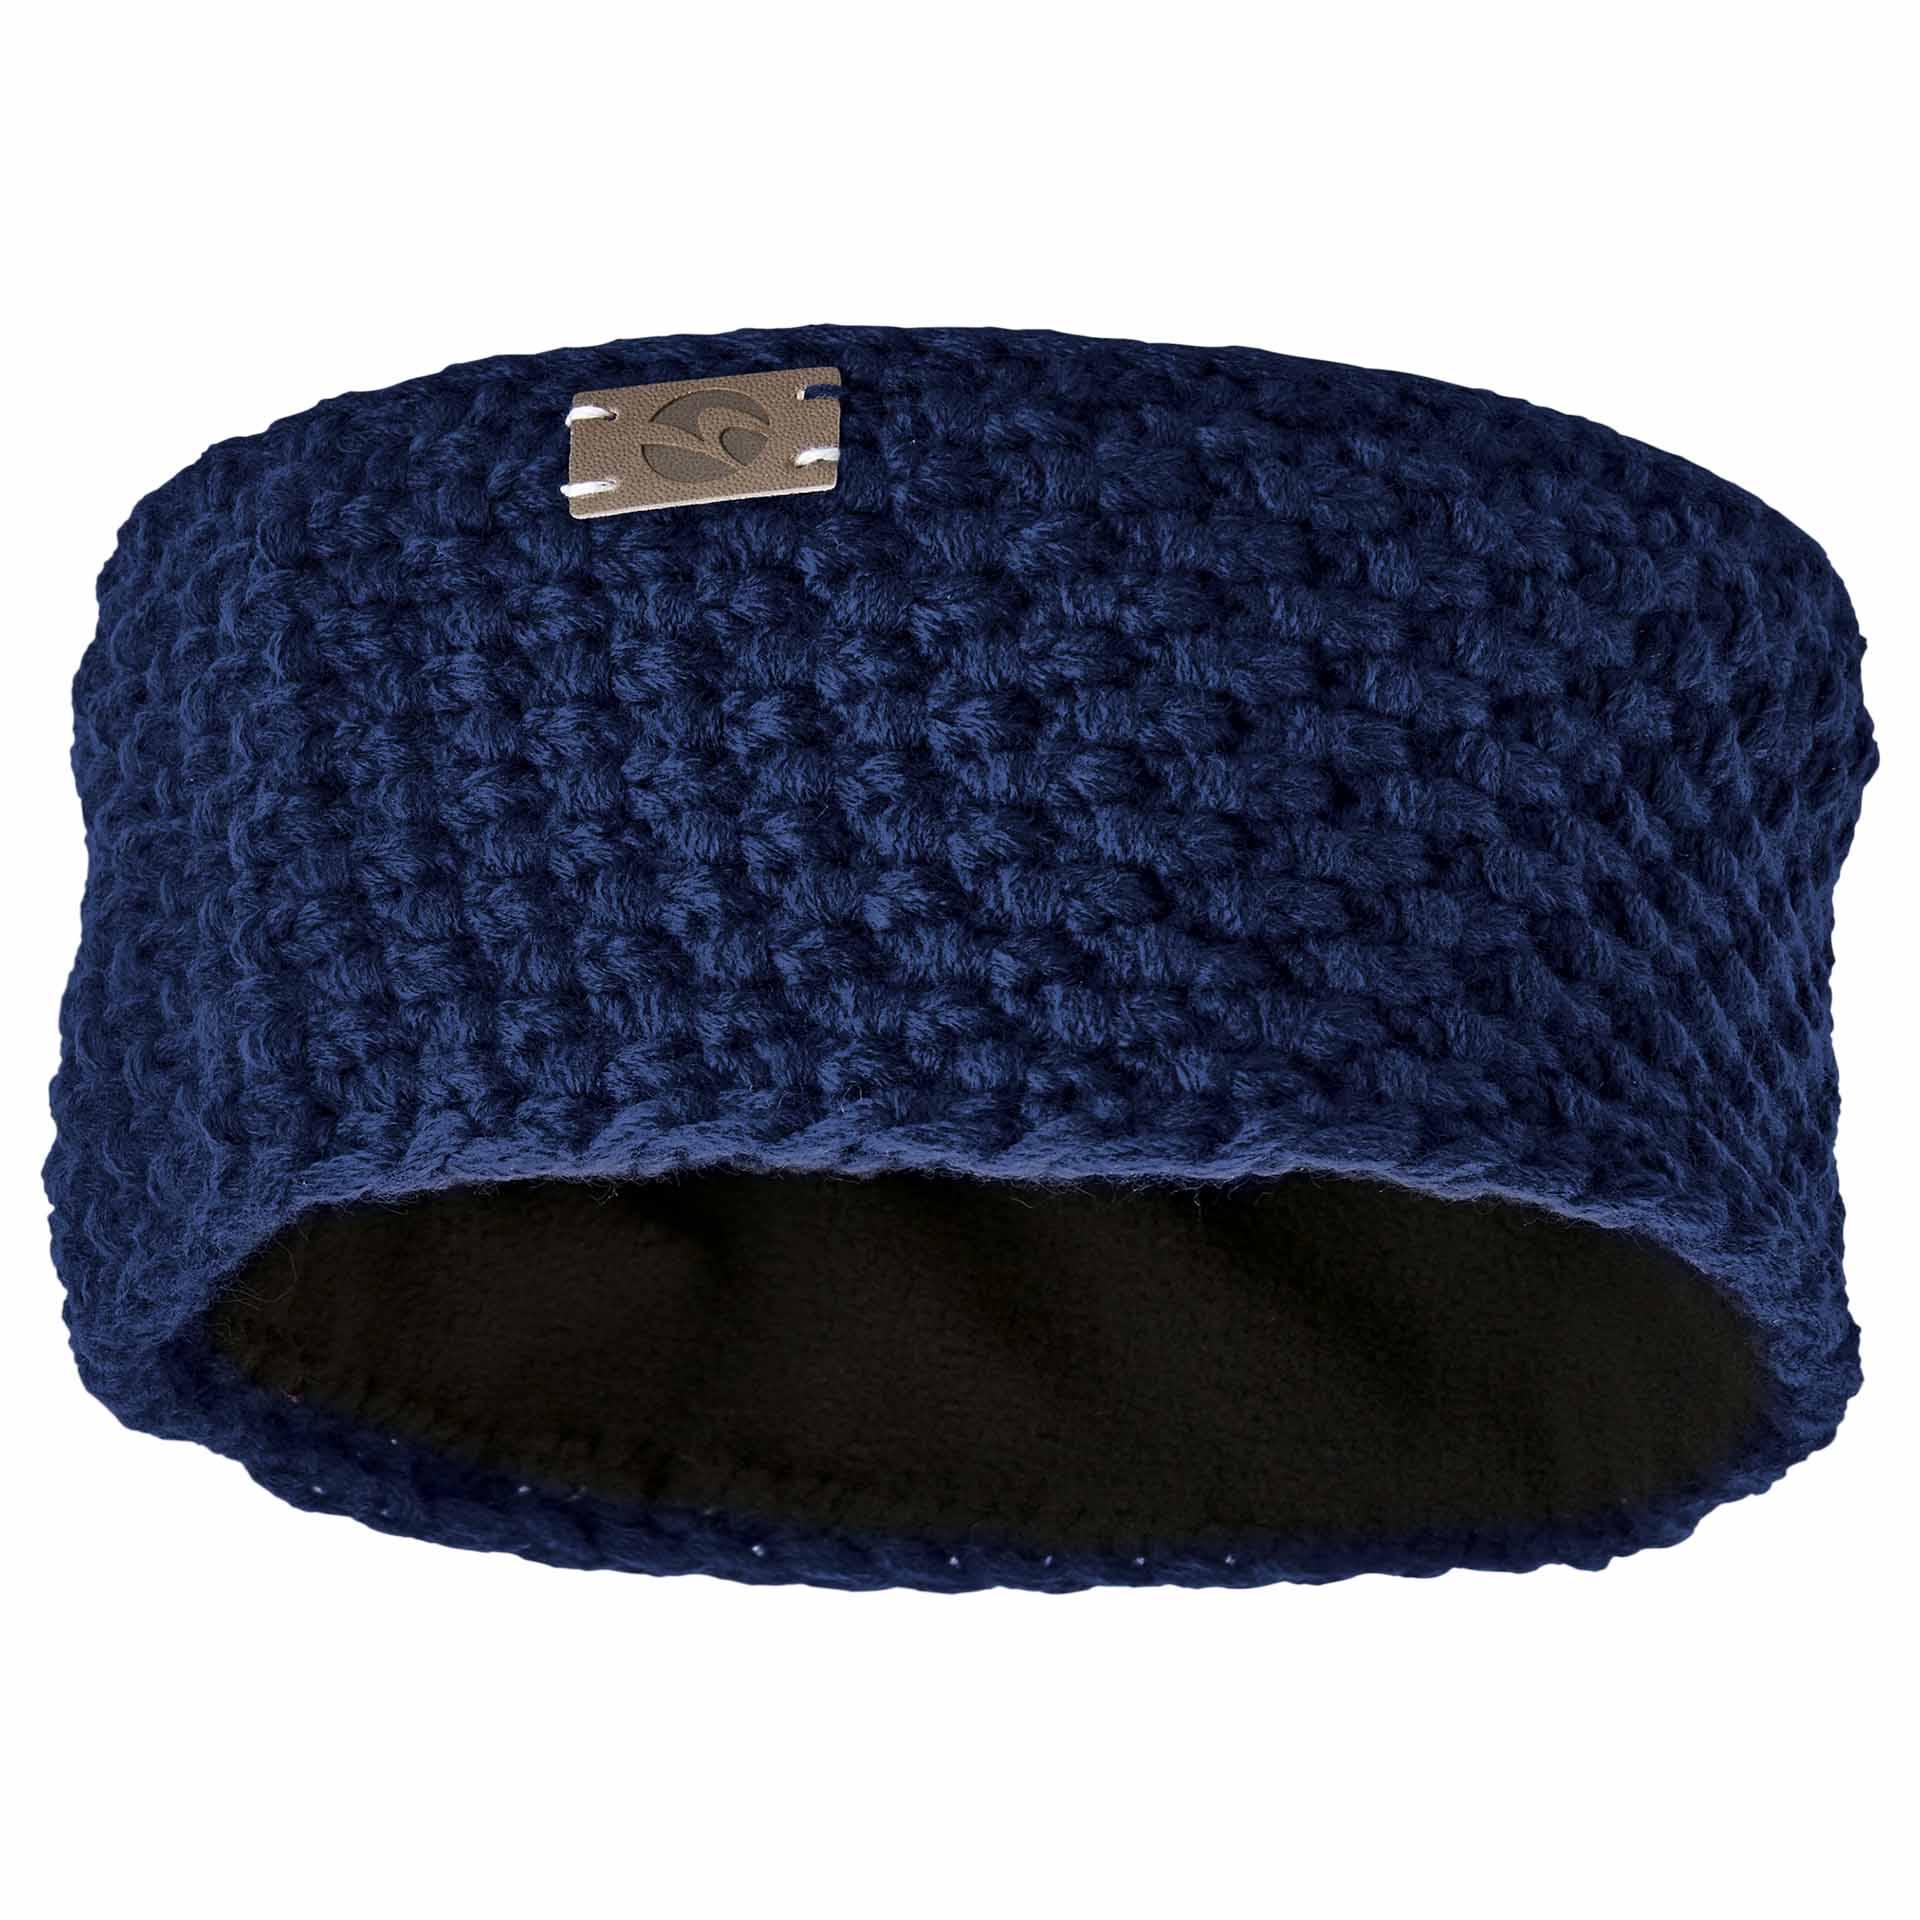 BUSSE Headband CLAIRE S (49-53) navy